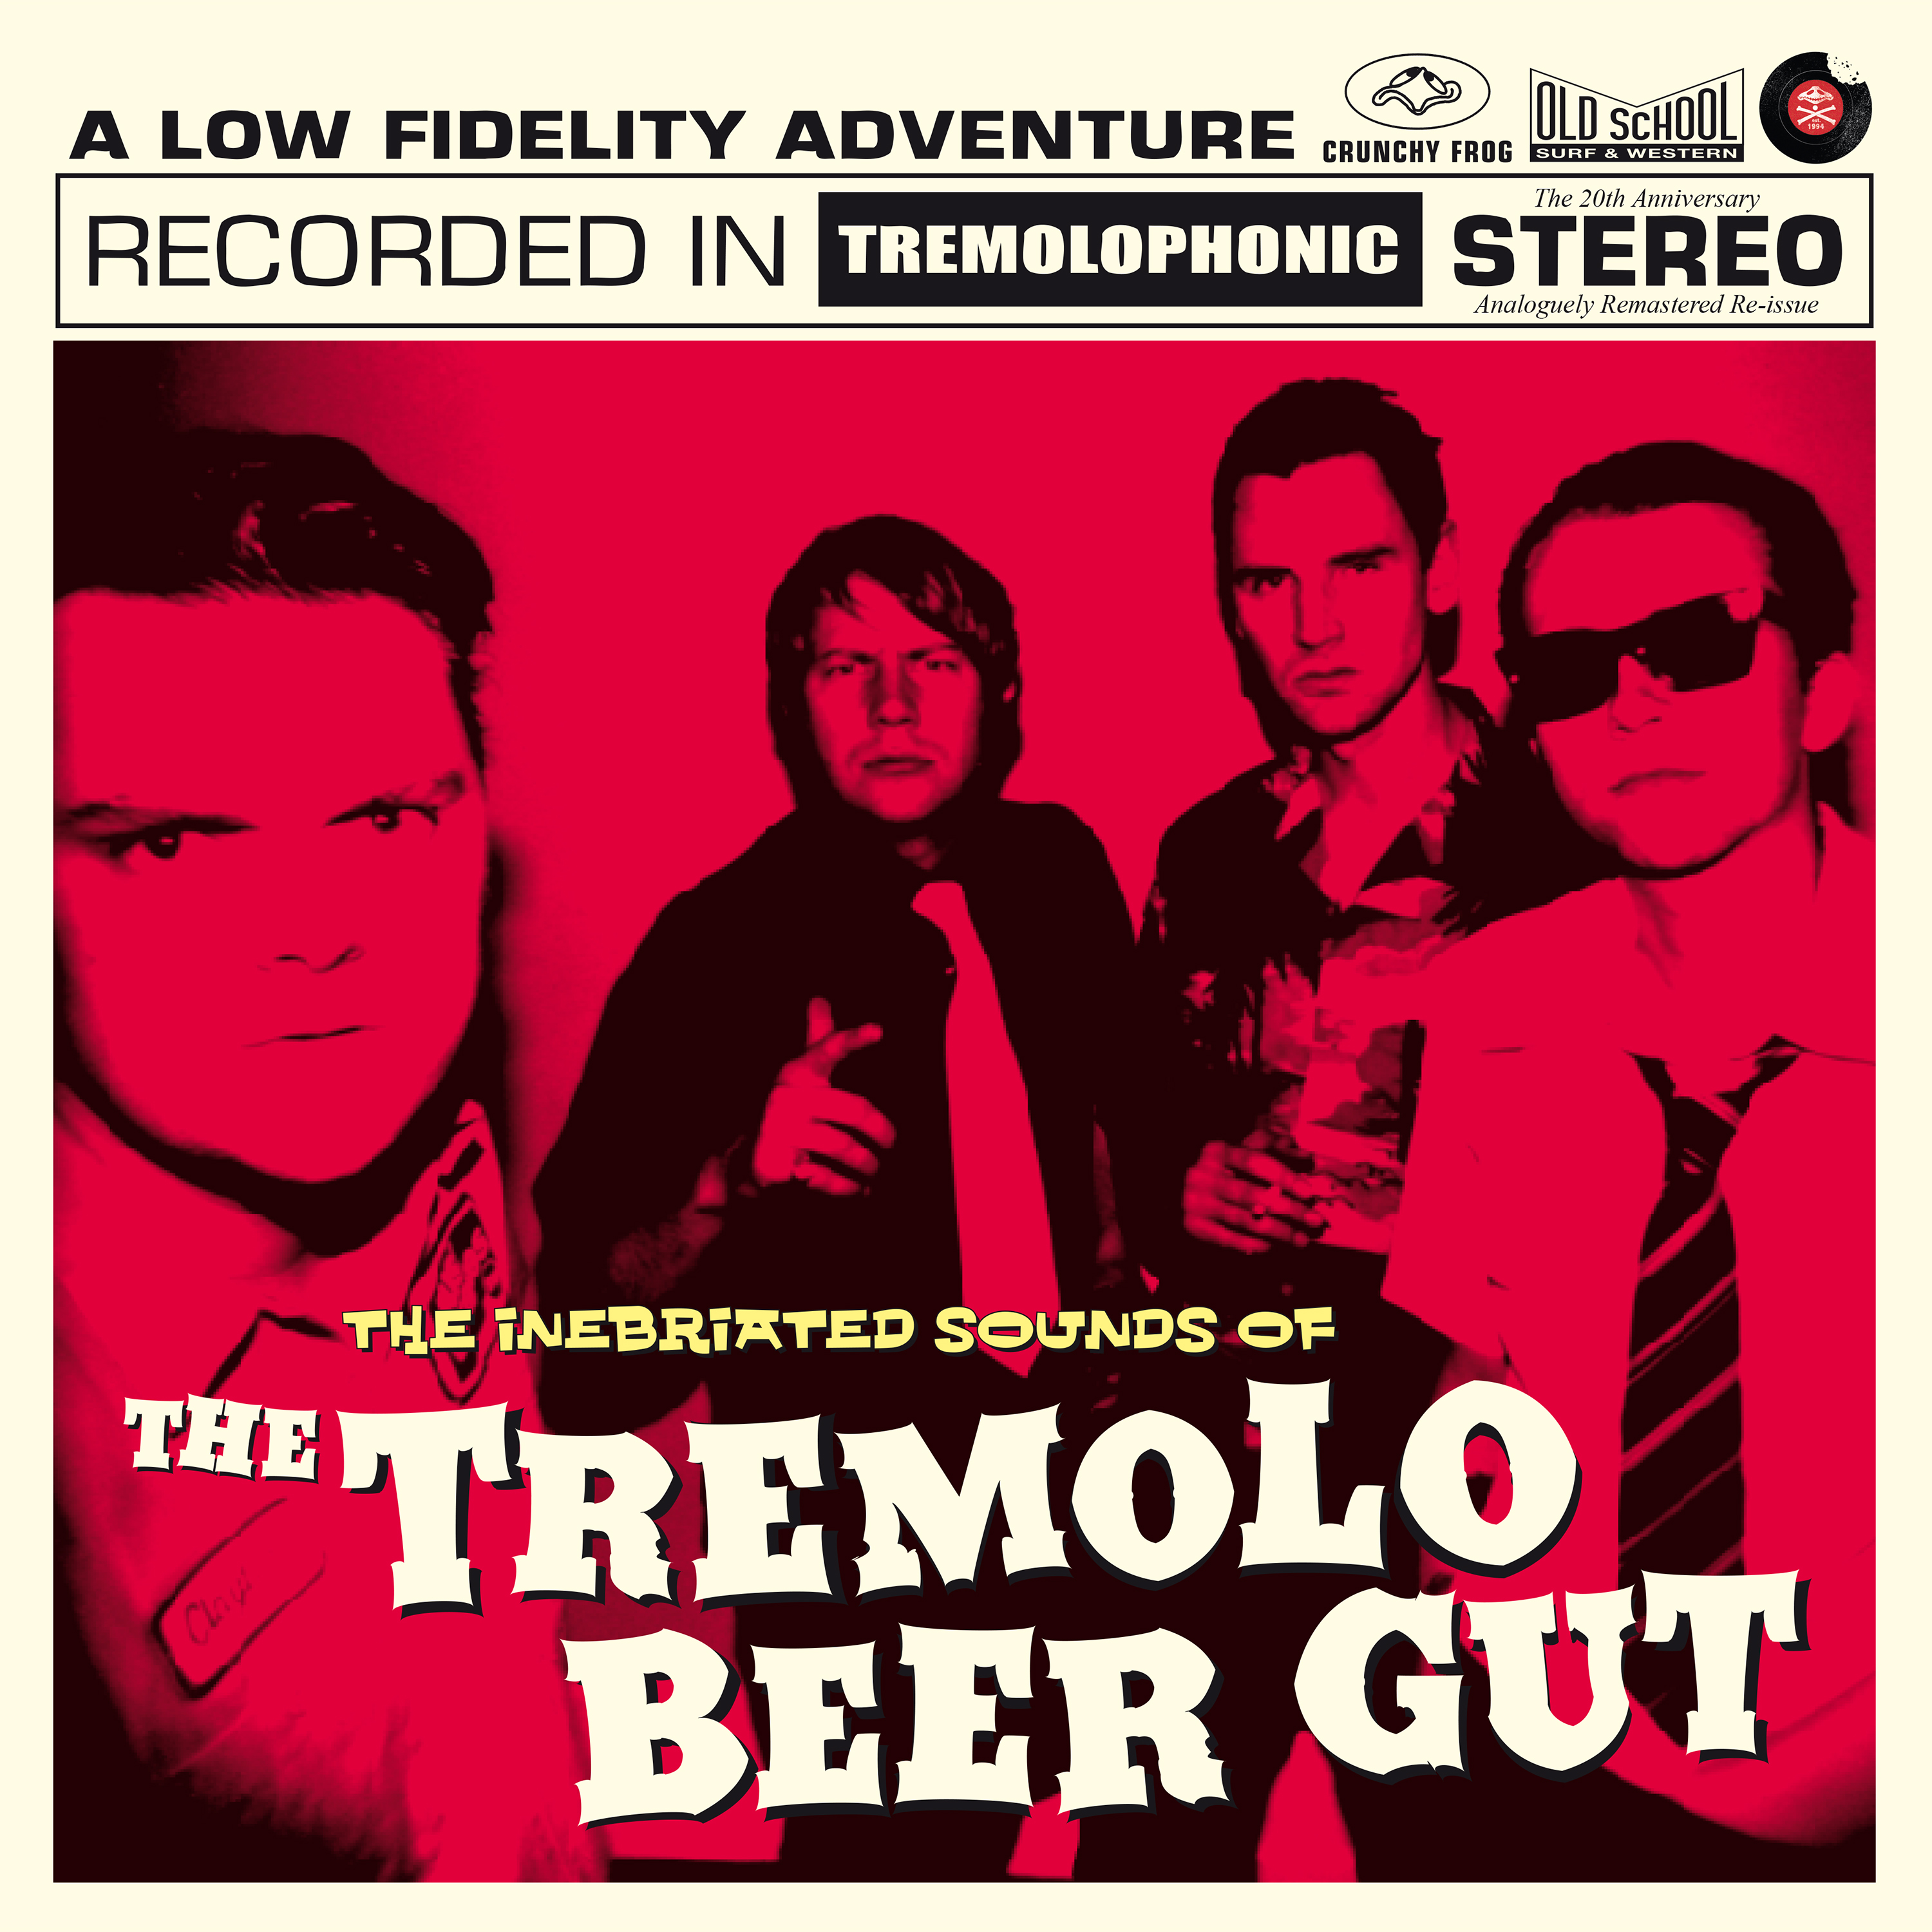 Tremolo Beer Gut - The Inebriated Sounds of The Tremol